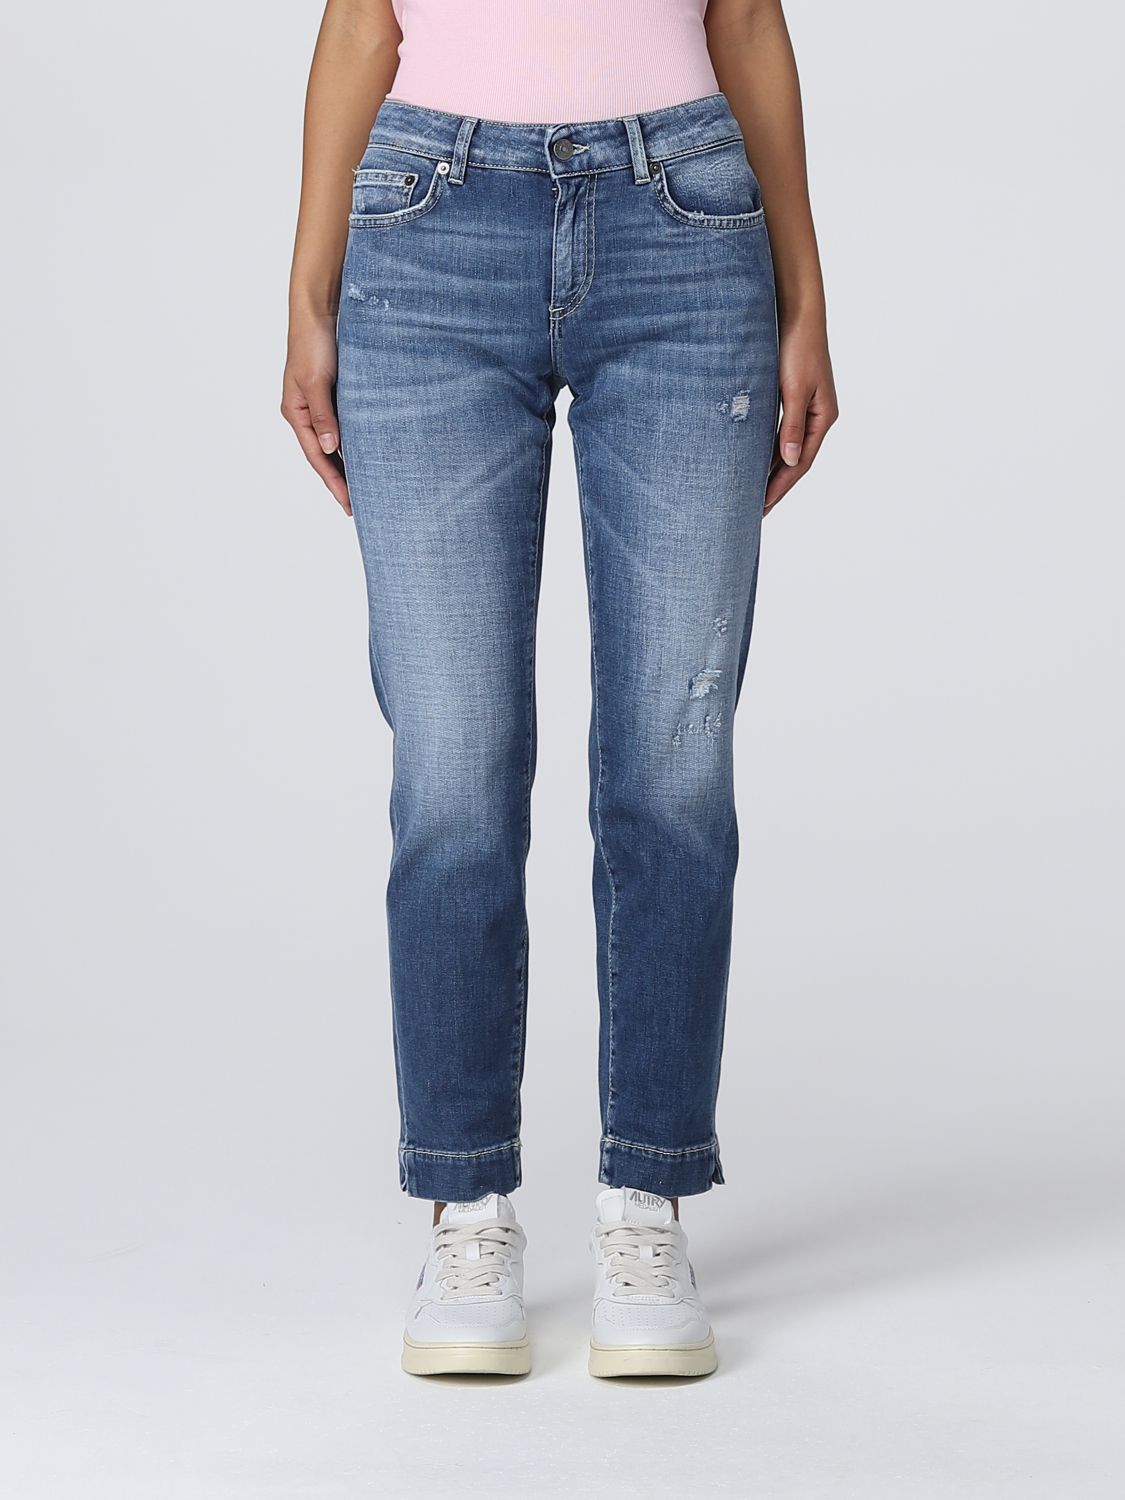 Spektakel Protestant Legacy DONDUP: jeans for woman - Denim | Dondup jeans DP618DS0145DFH2 online on  GIGLIO.COM